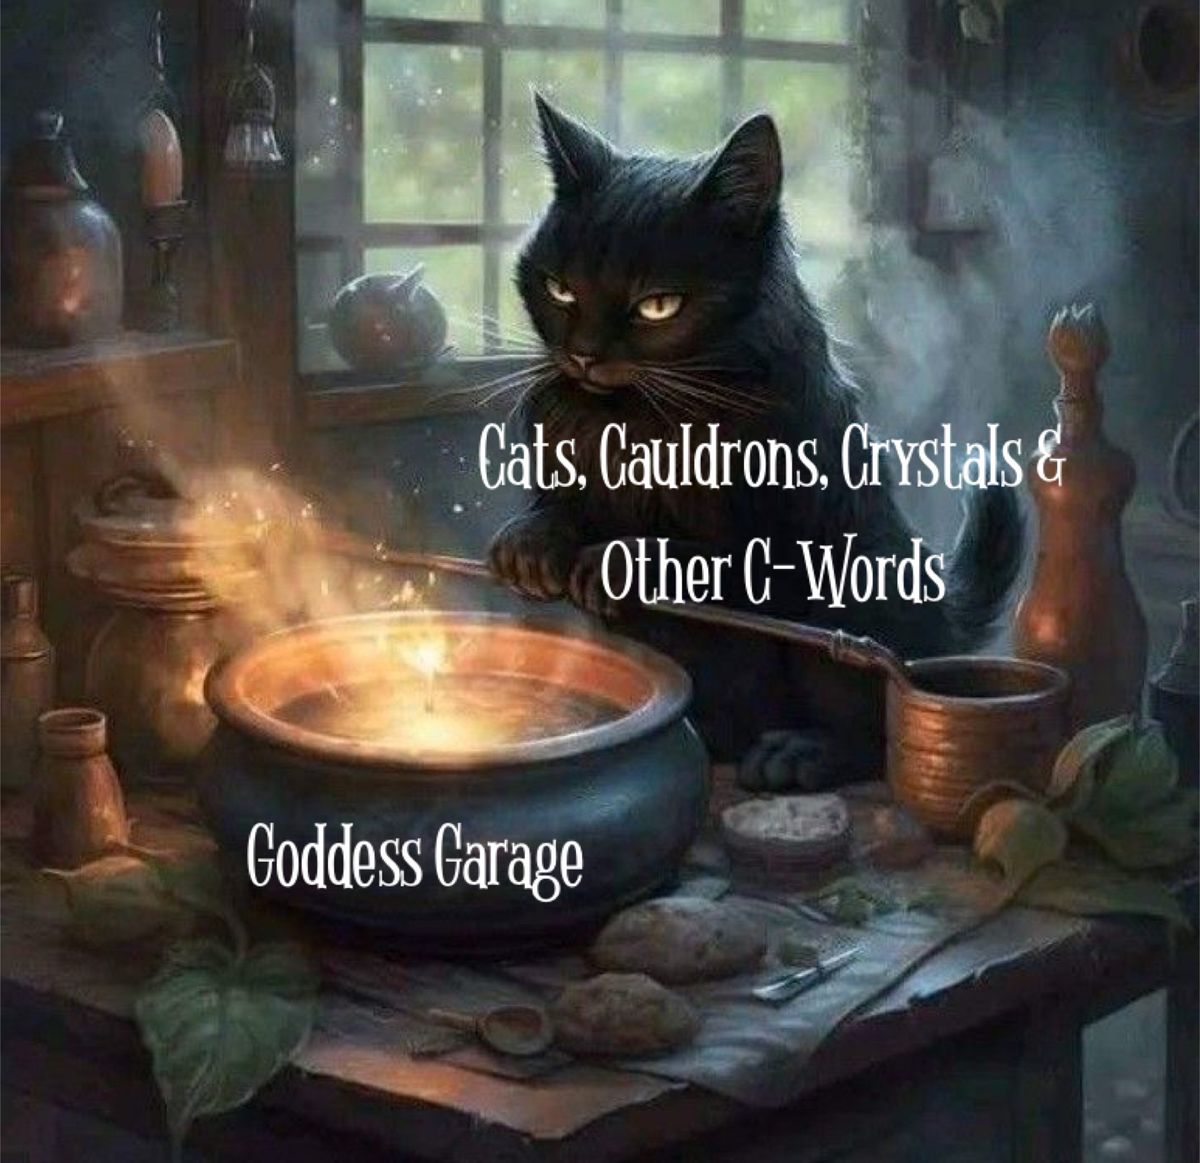 Cats, Cauldrons Crystals & Other C-Words